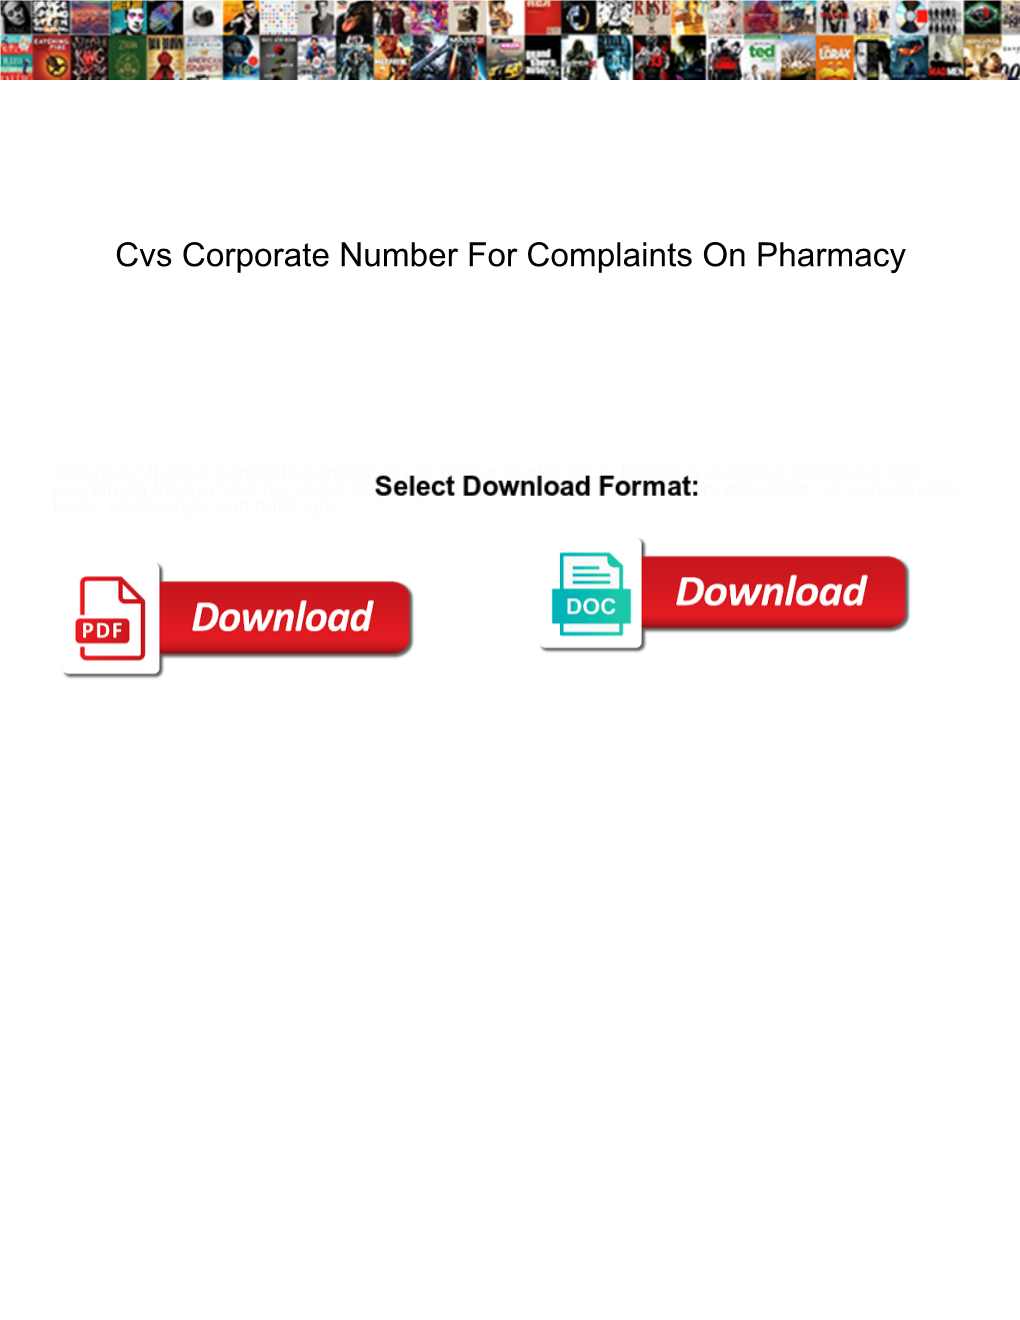 Cvs Corporate Number for Complaints on Pharmacy